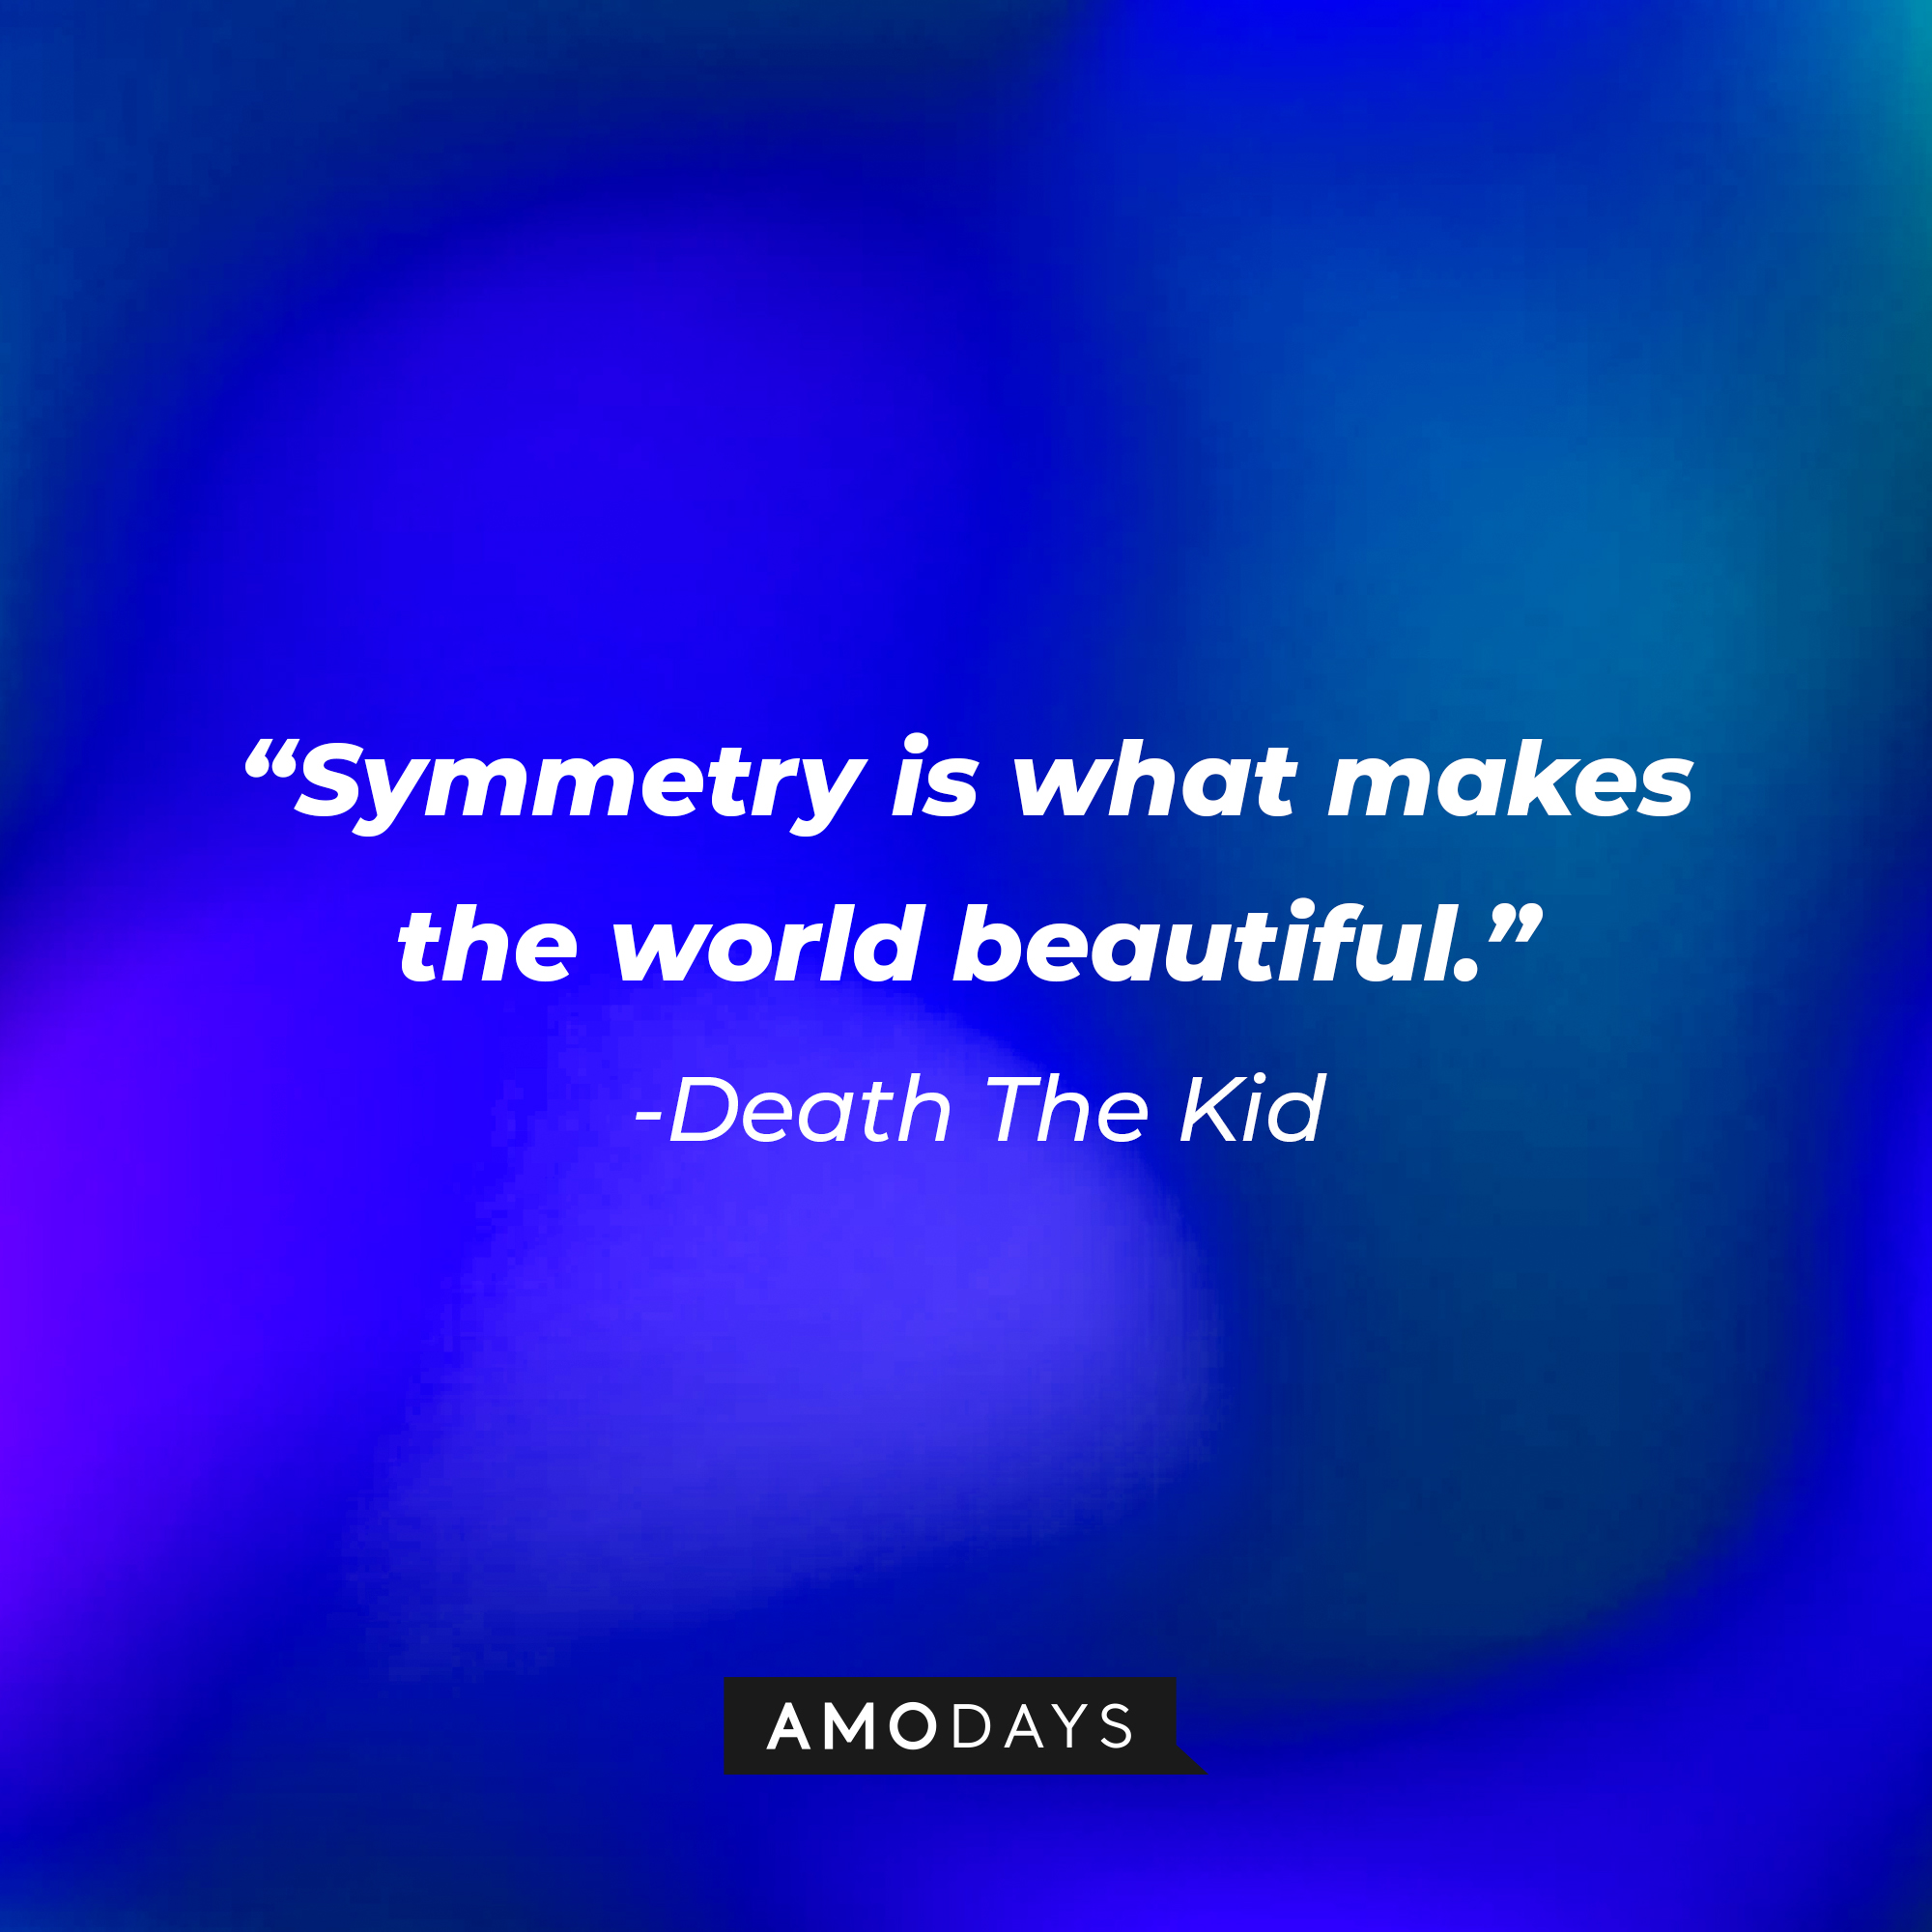 Death The Kid’s quote: "Symmetry is what makes the world beautiful." | Image: AmoDays Death The Kid’s quote: "Symmetry is what makes the world beautiful." | Image: AmoDays